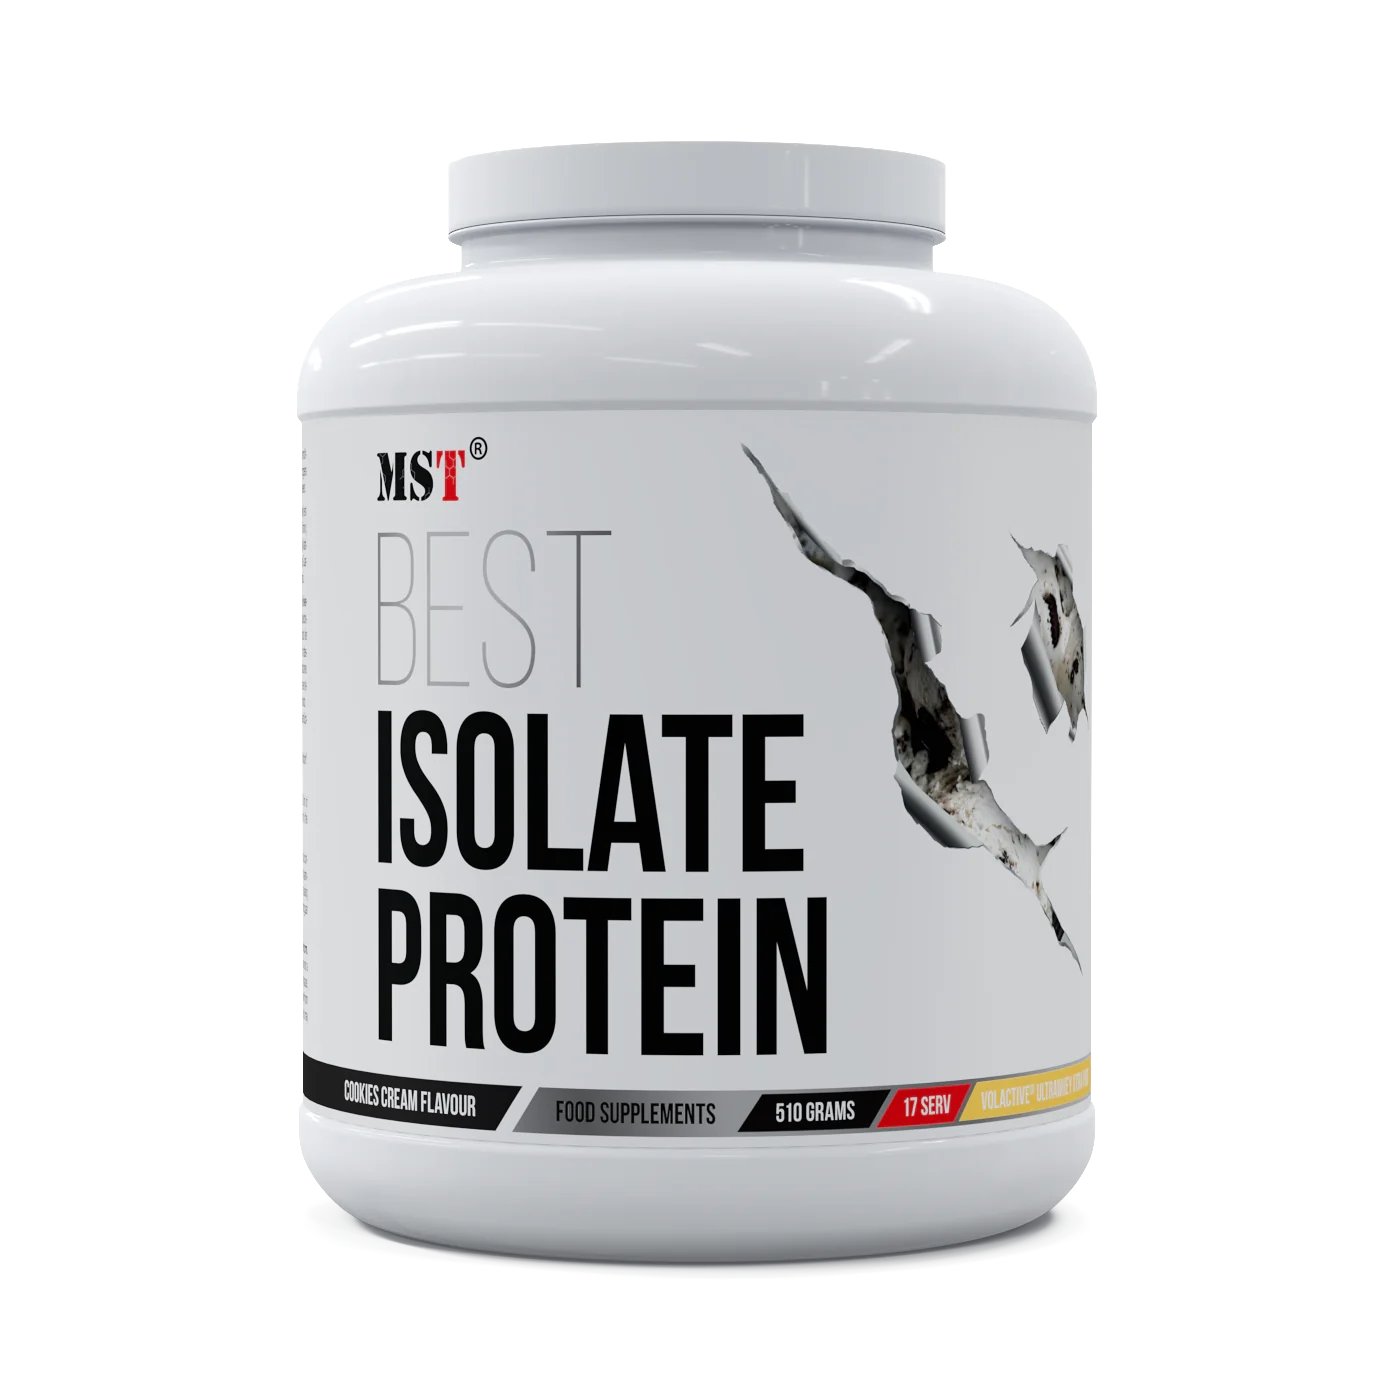 MST Nutrition Протеин MST Best Isolate Protein, 2.01 кг Печенье-крем, , 2010 г